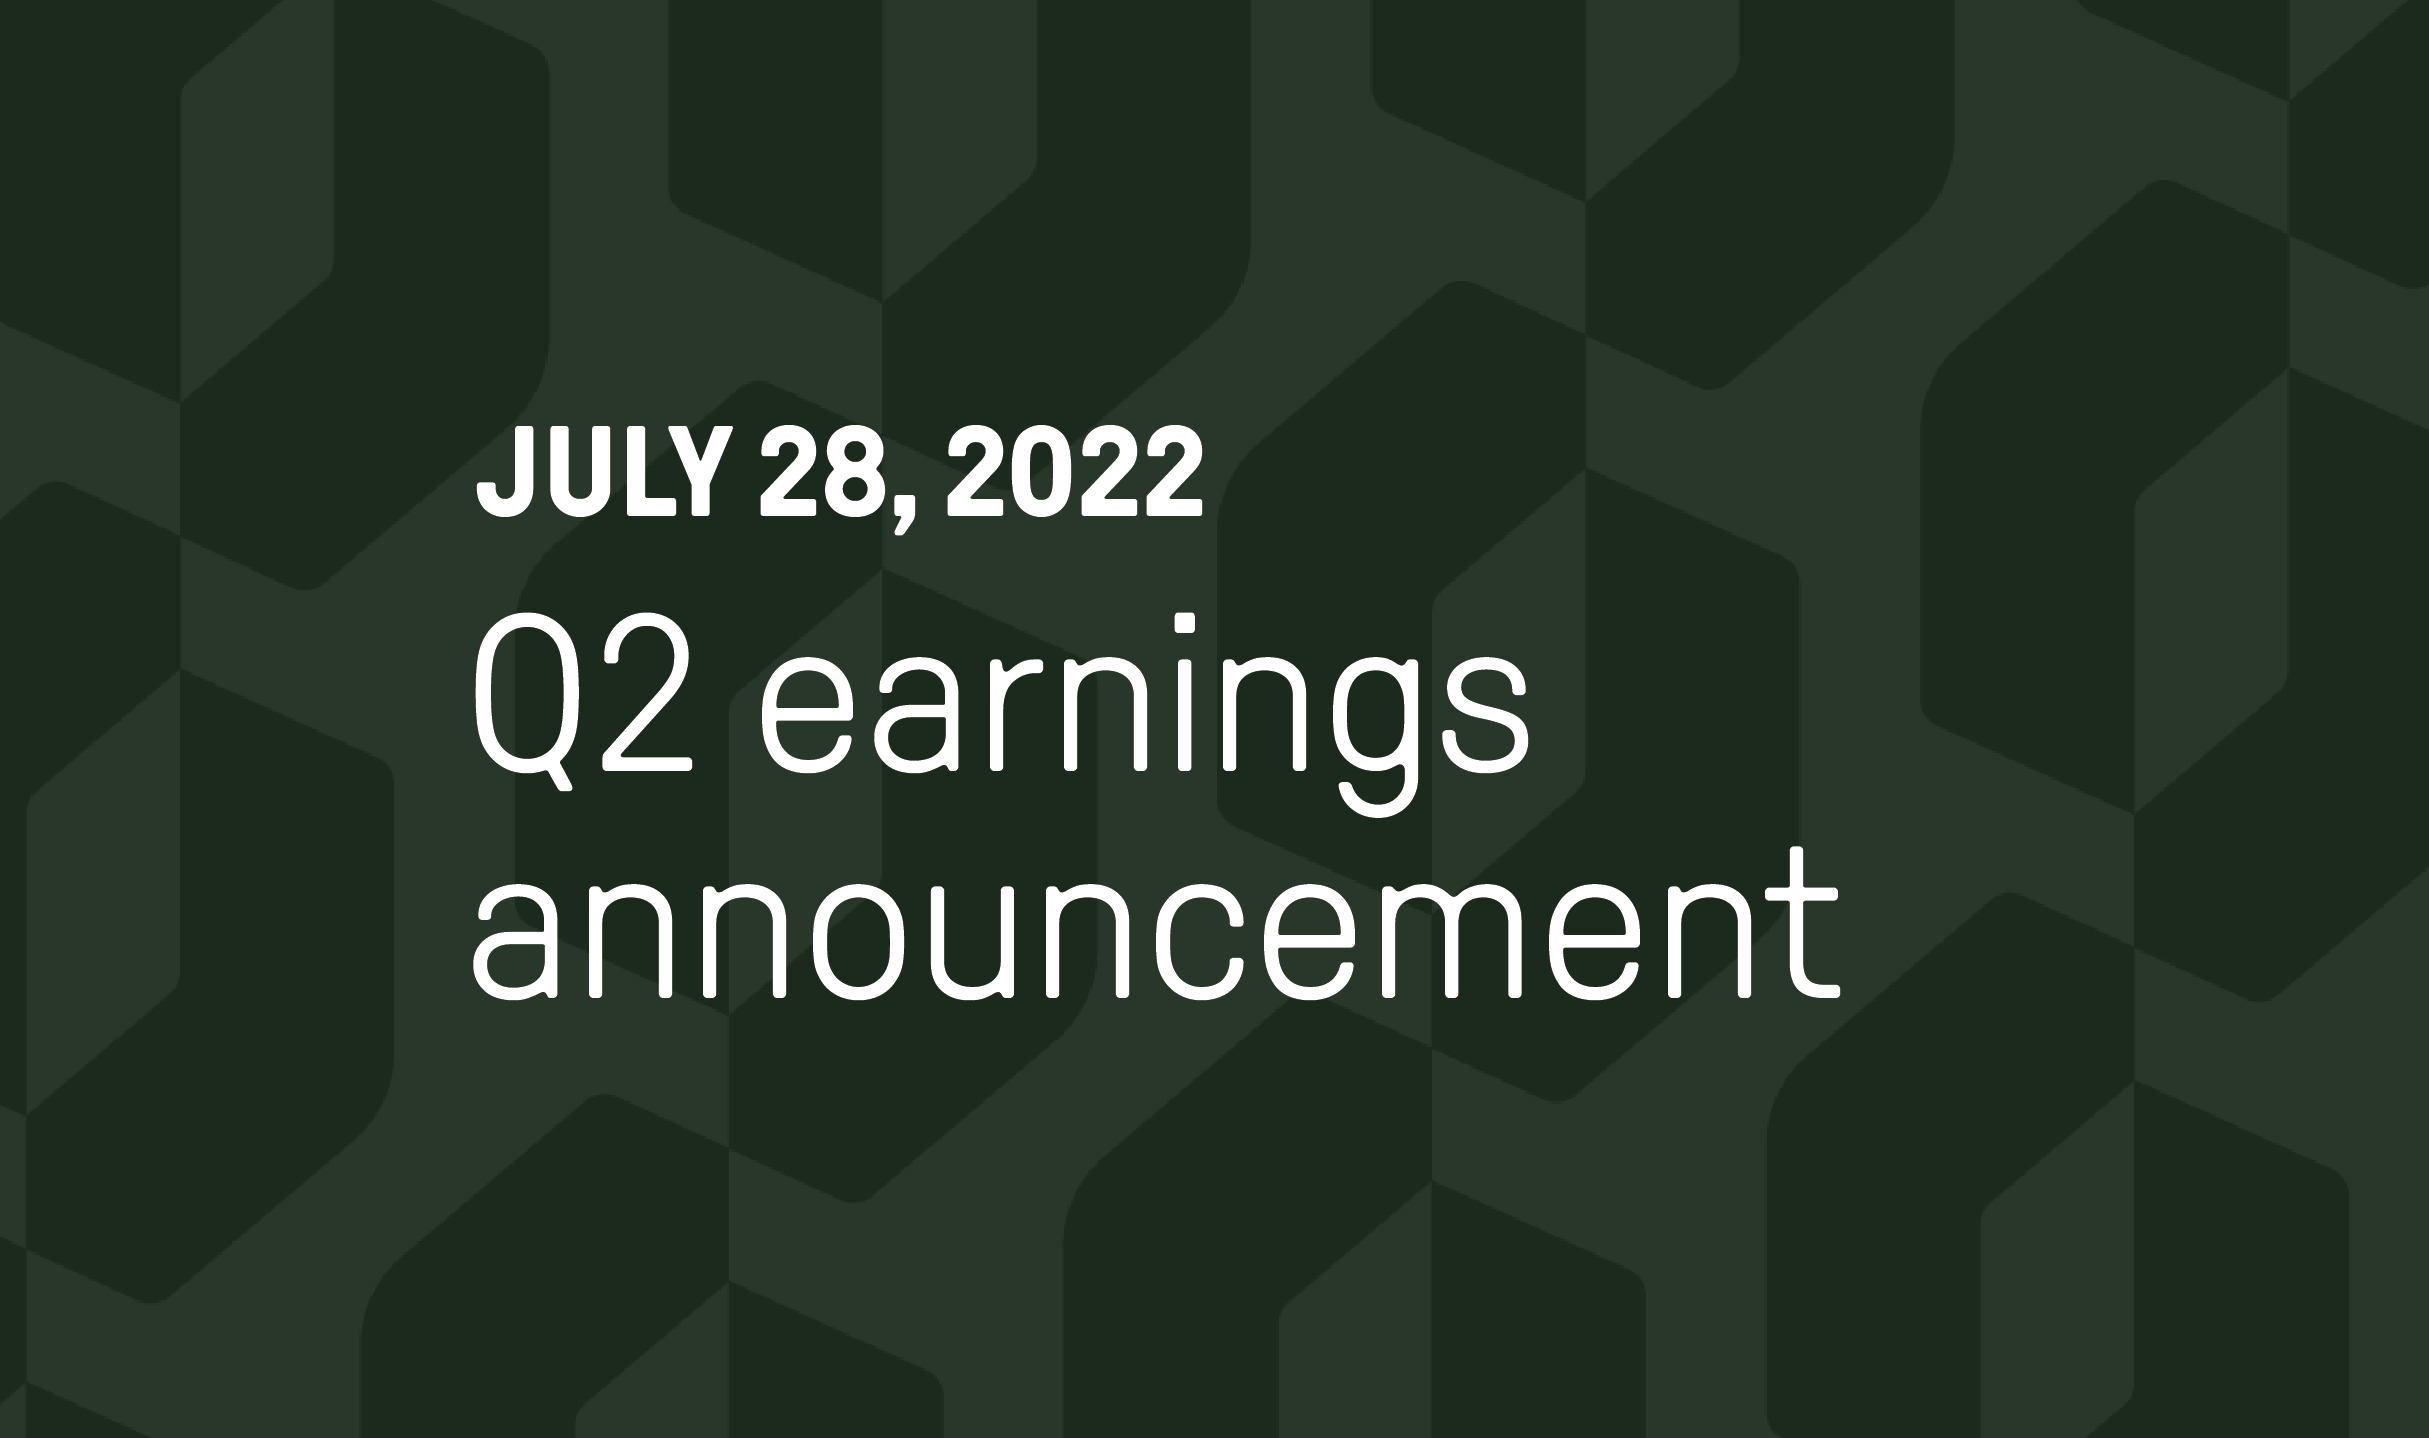 Green Oshkosh logo pattern background with white Oshkosh Corporation logo and white text that reads July 28, 2022 Q2 earnings announcement